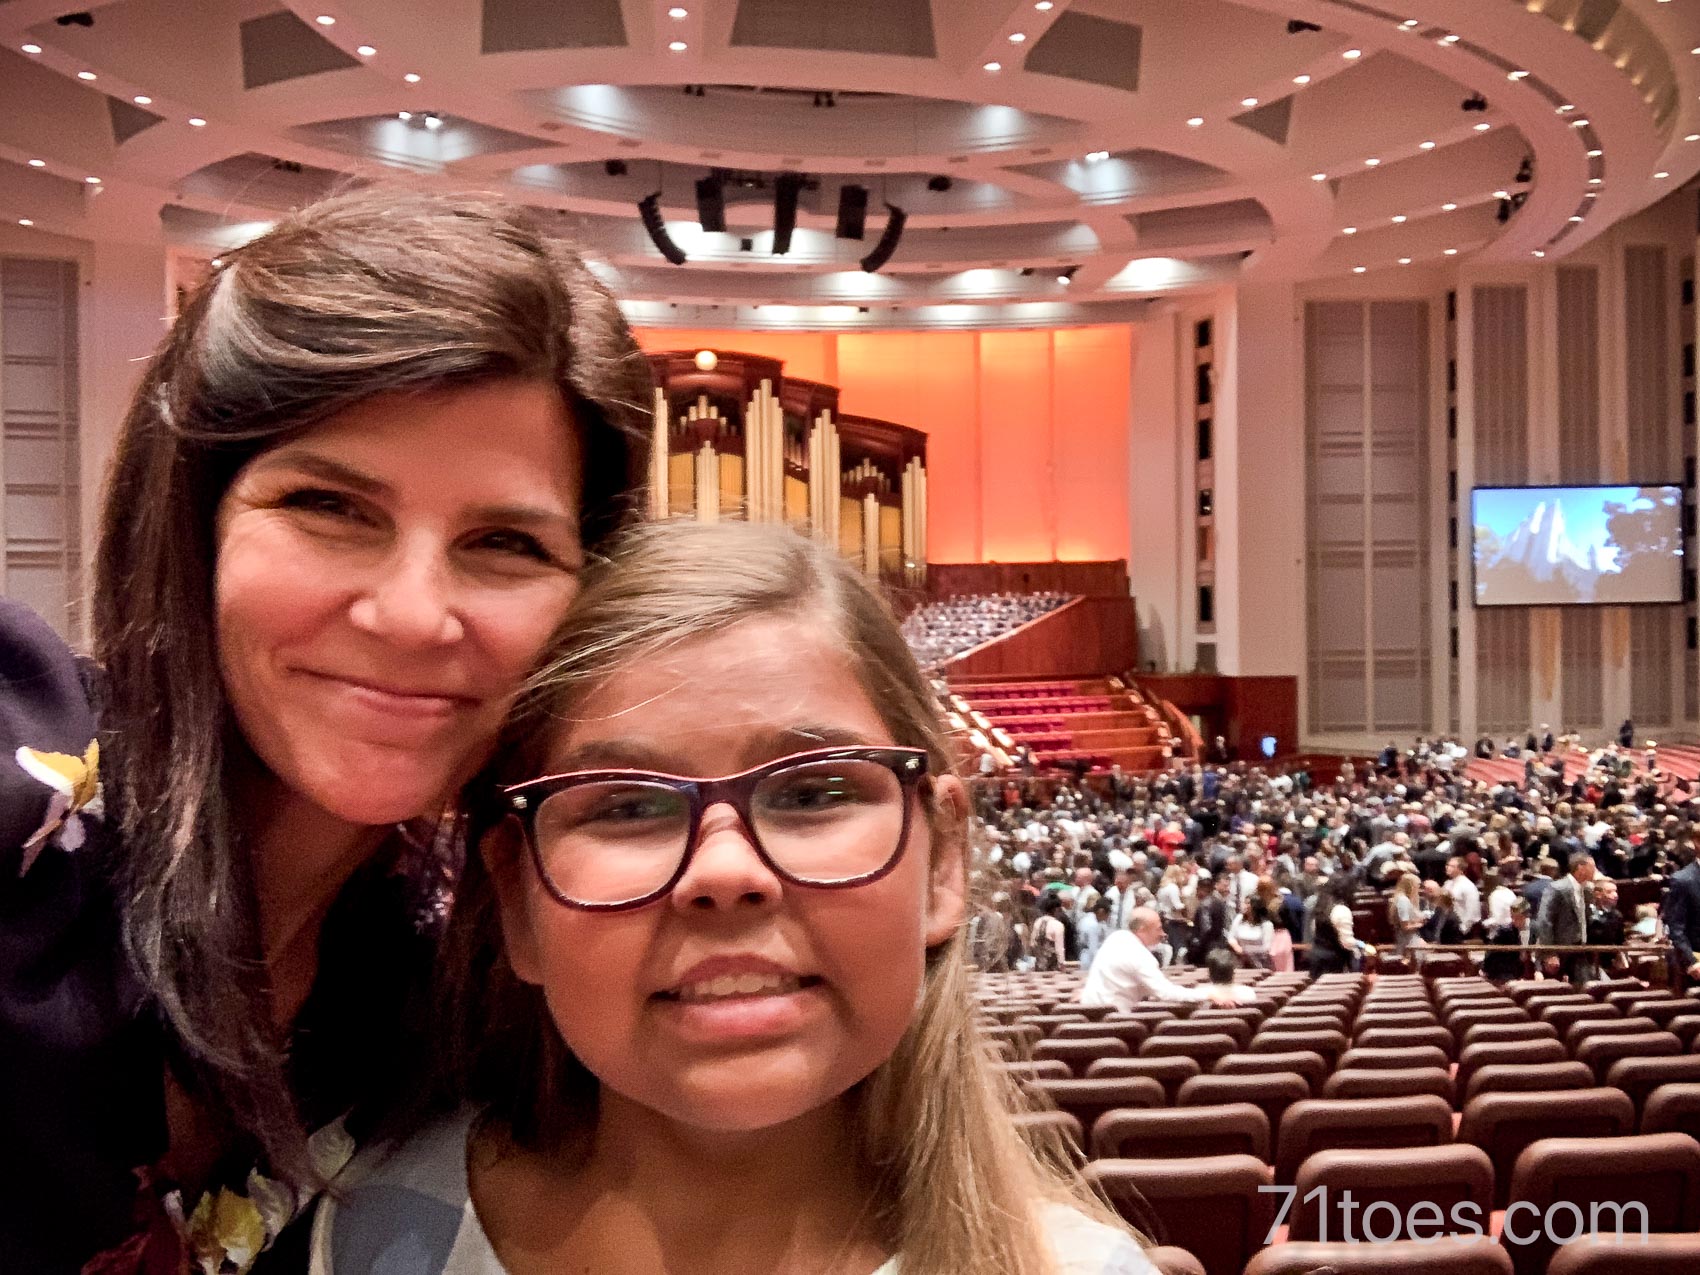 Lucy and Shawni at the LDS conference center